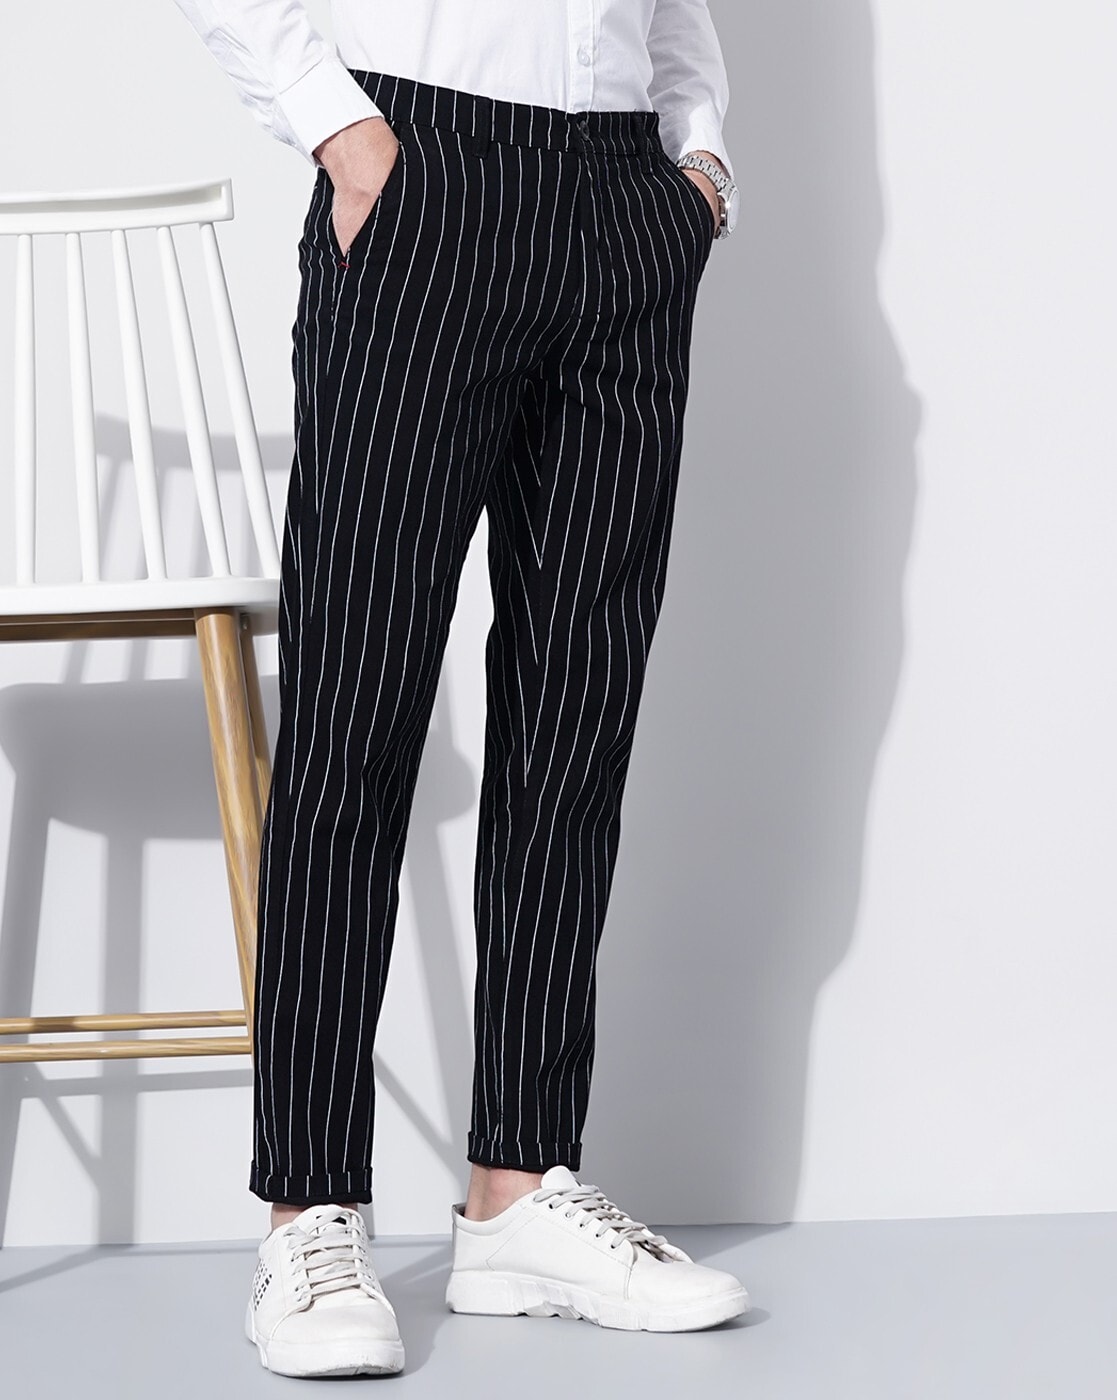 Chinos Stretchable Cotton Stripe Trousers For Men 2832 3436